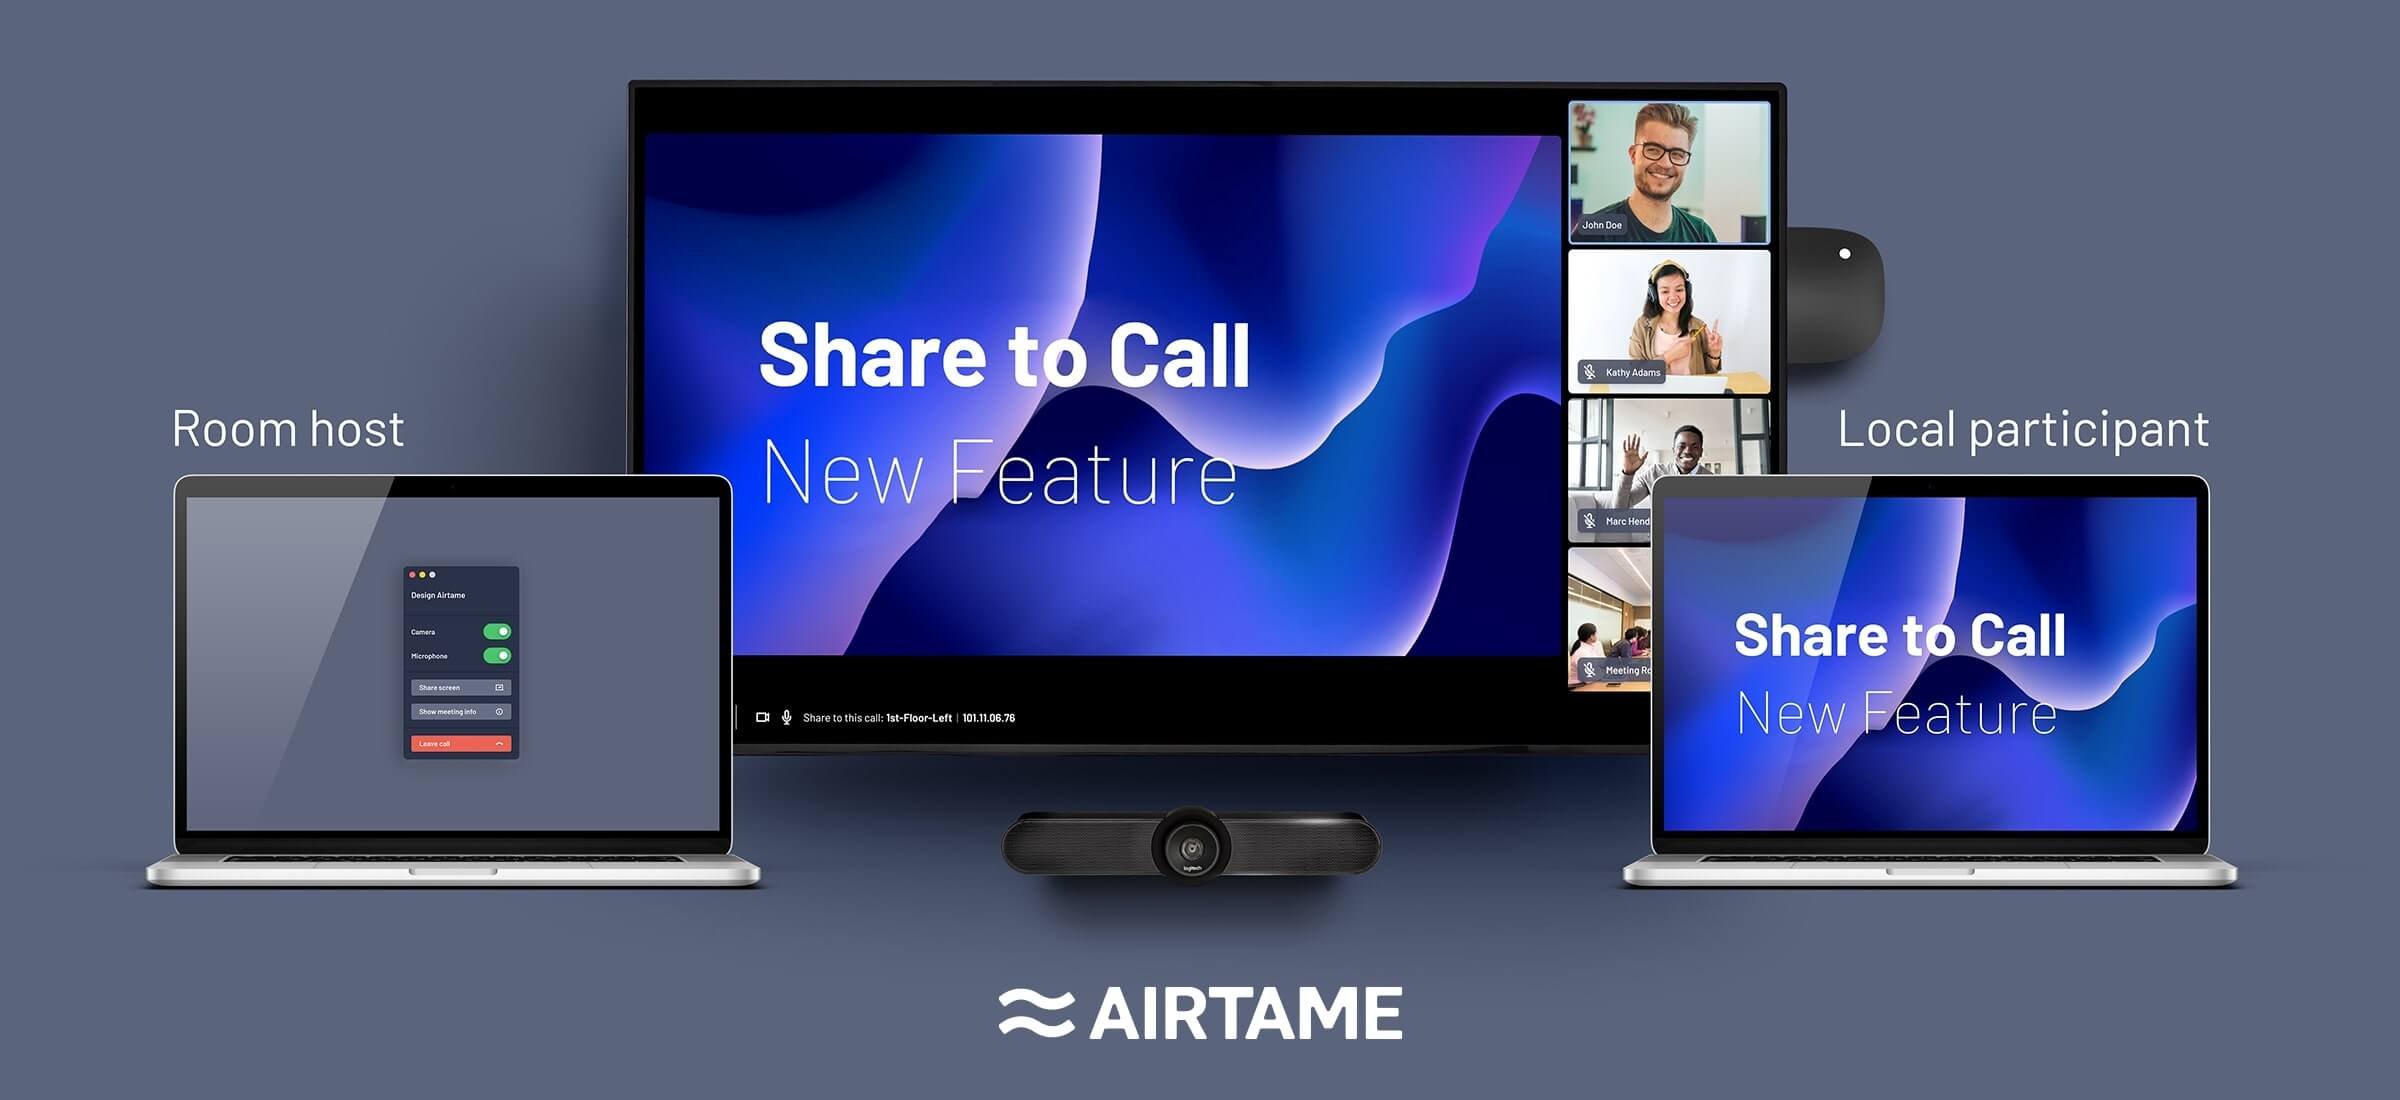 Airtame launches new hybrid conferencing feature that simplifies screen sharing